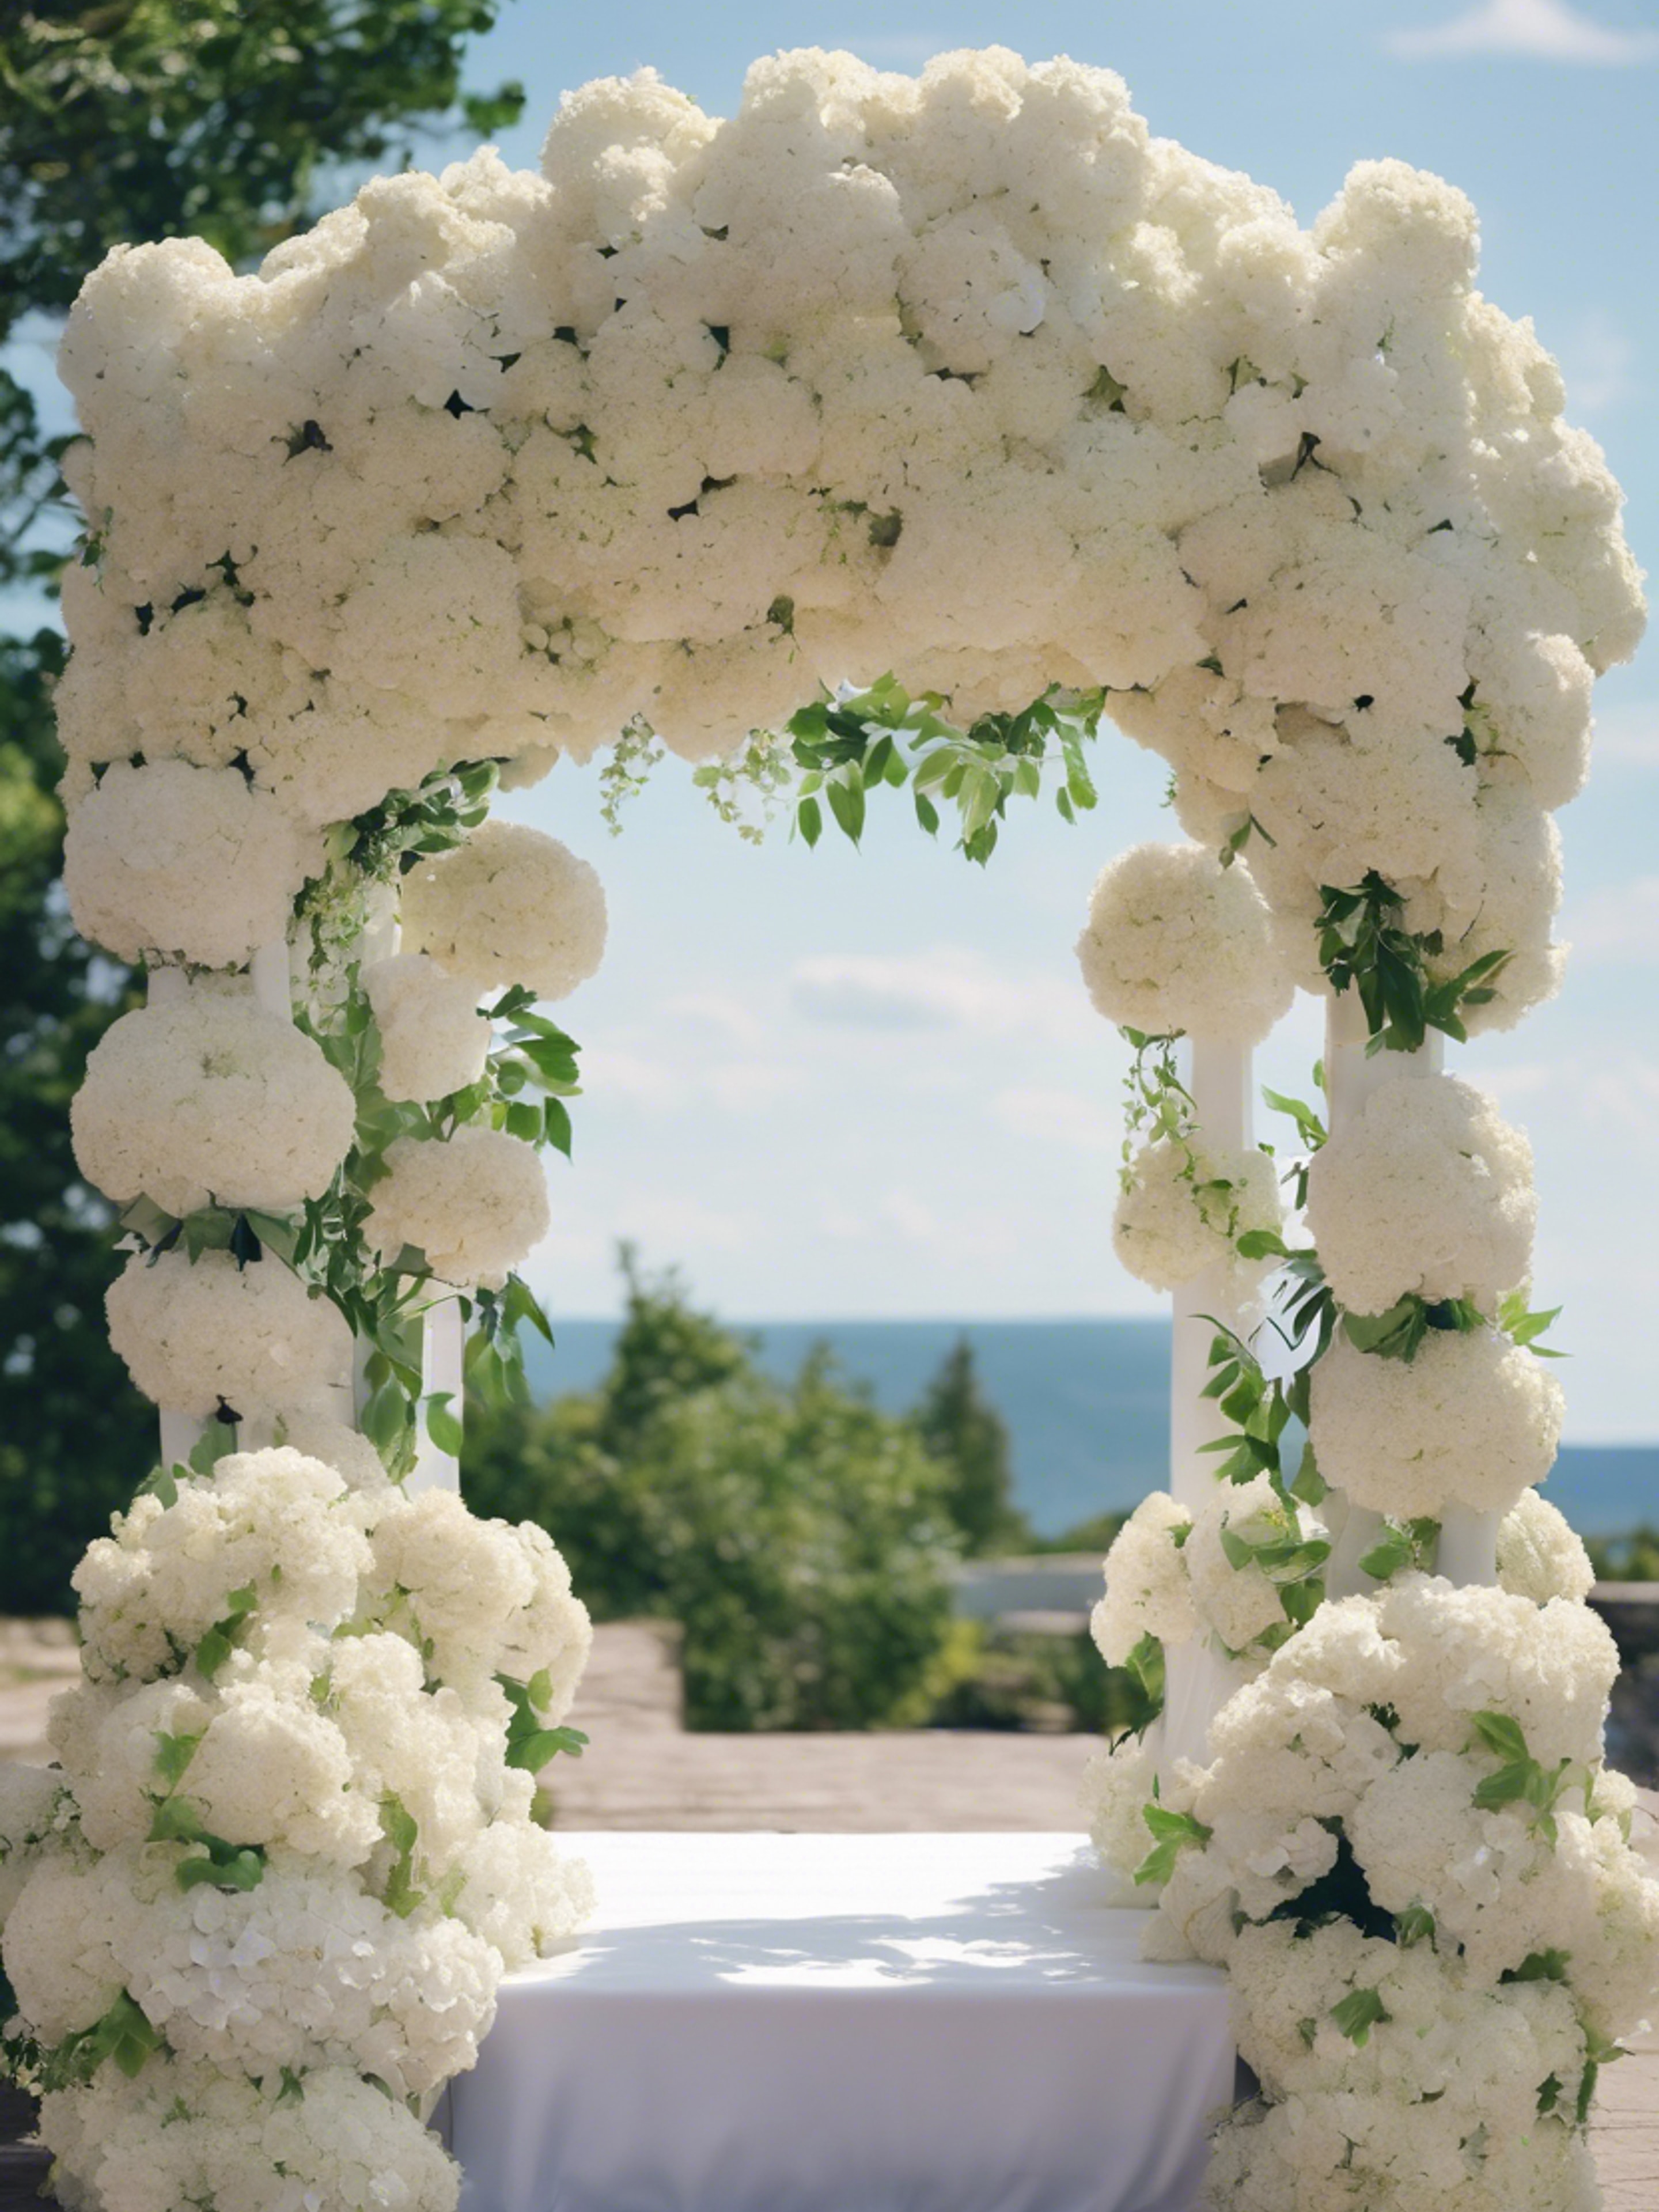 A wedding altar beautifully adorned with white hydrangeas under an open sky. Wallpaper[f43ab9123f1f4d59942d]